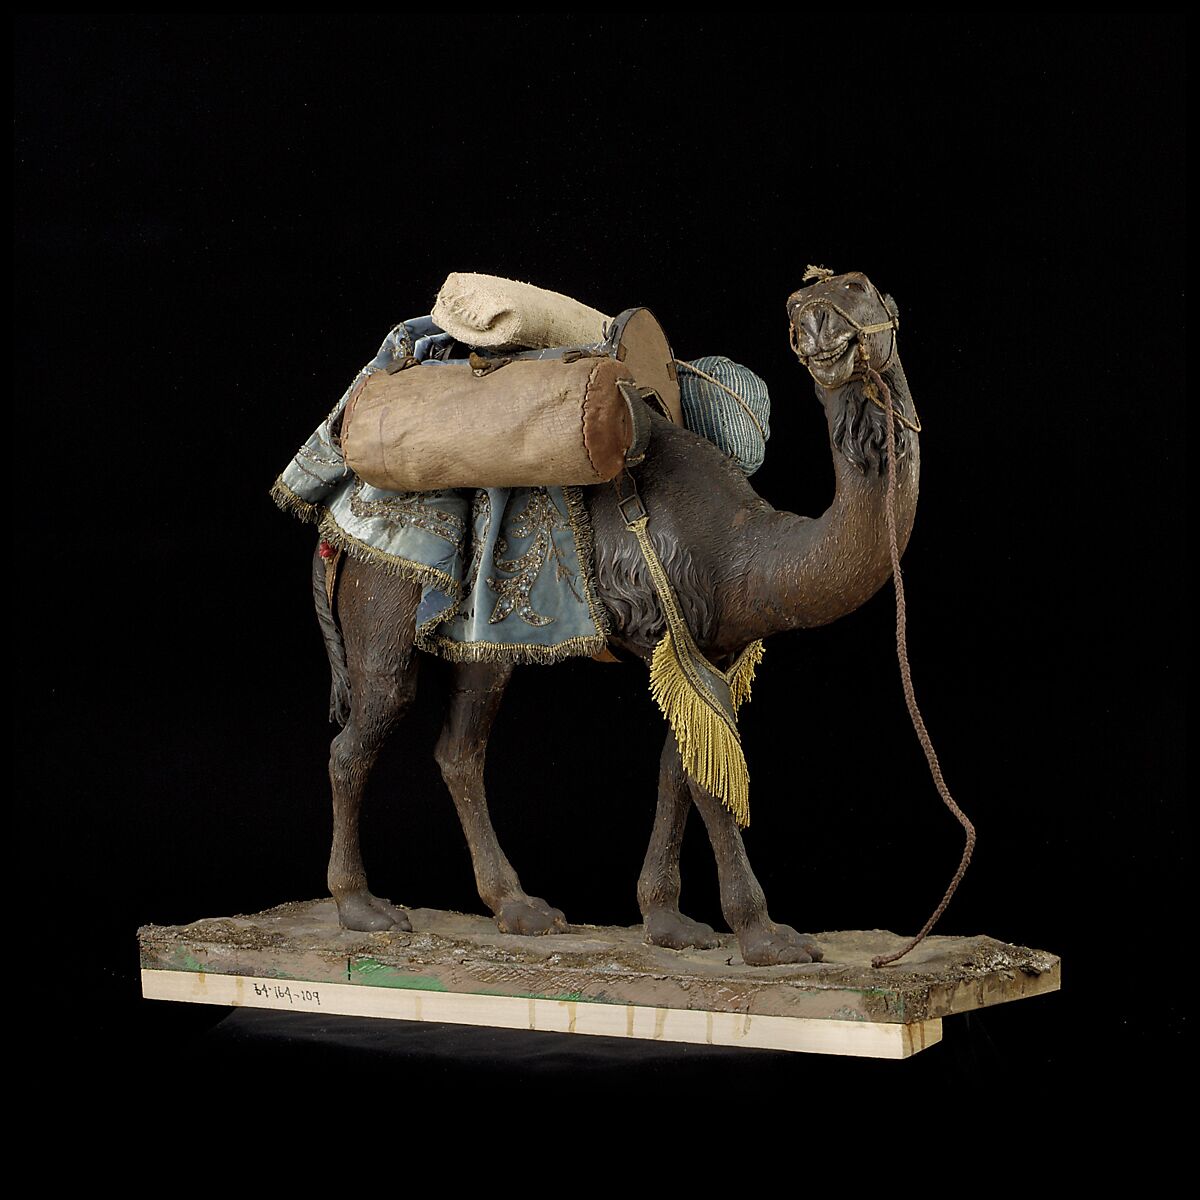 Camel, Polychromed wooden body covered with stucco; wooden saddle and leather girth straps; burlap cushion and leather saddlebags, Italian, Naples